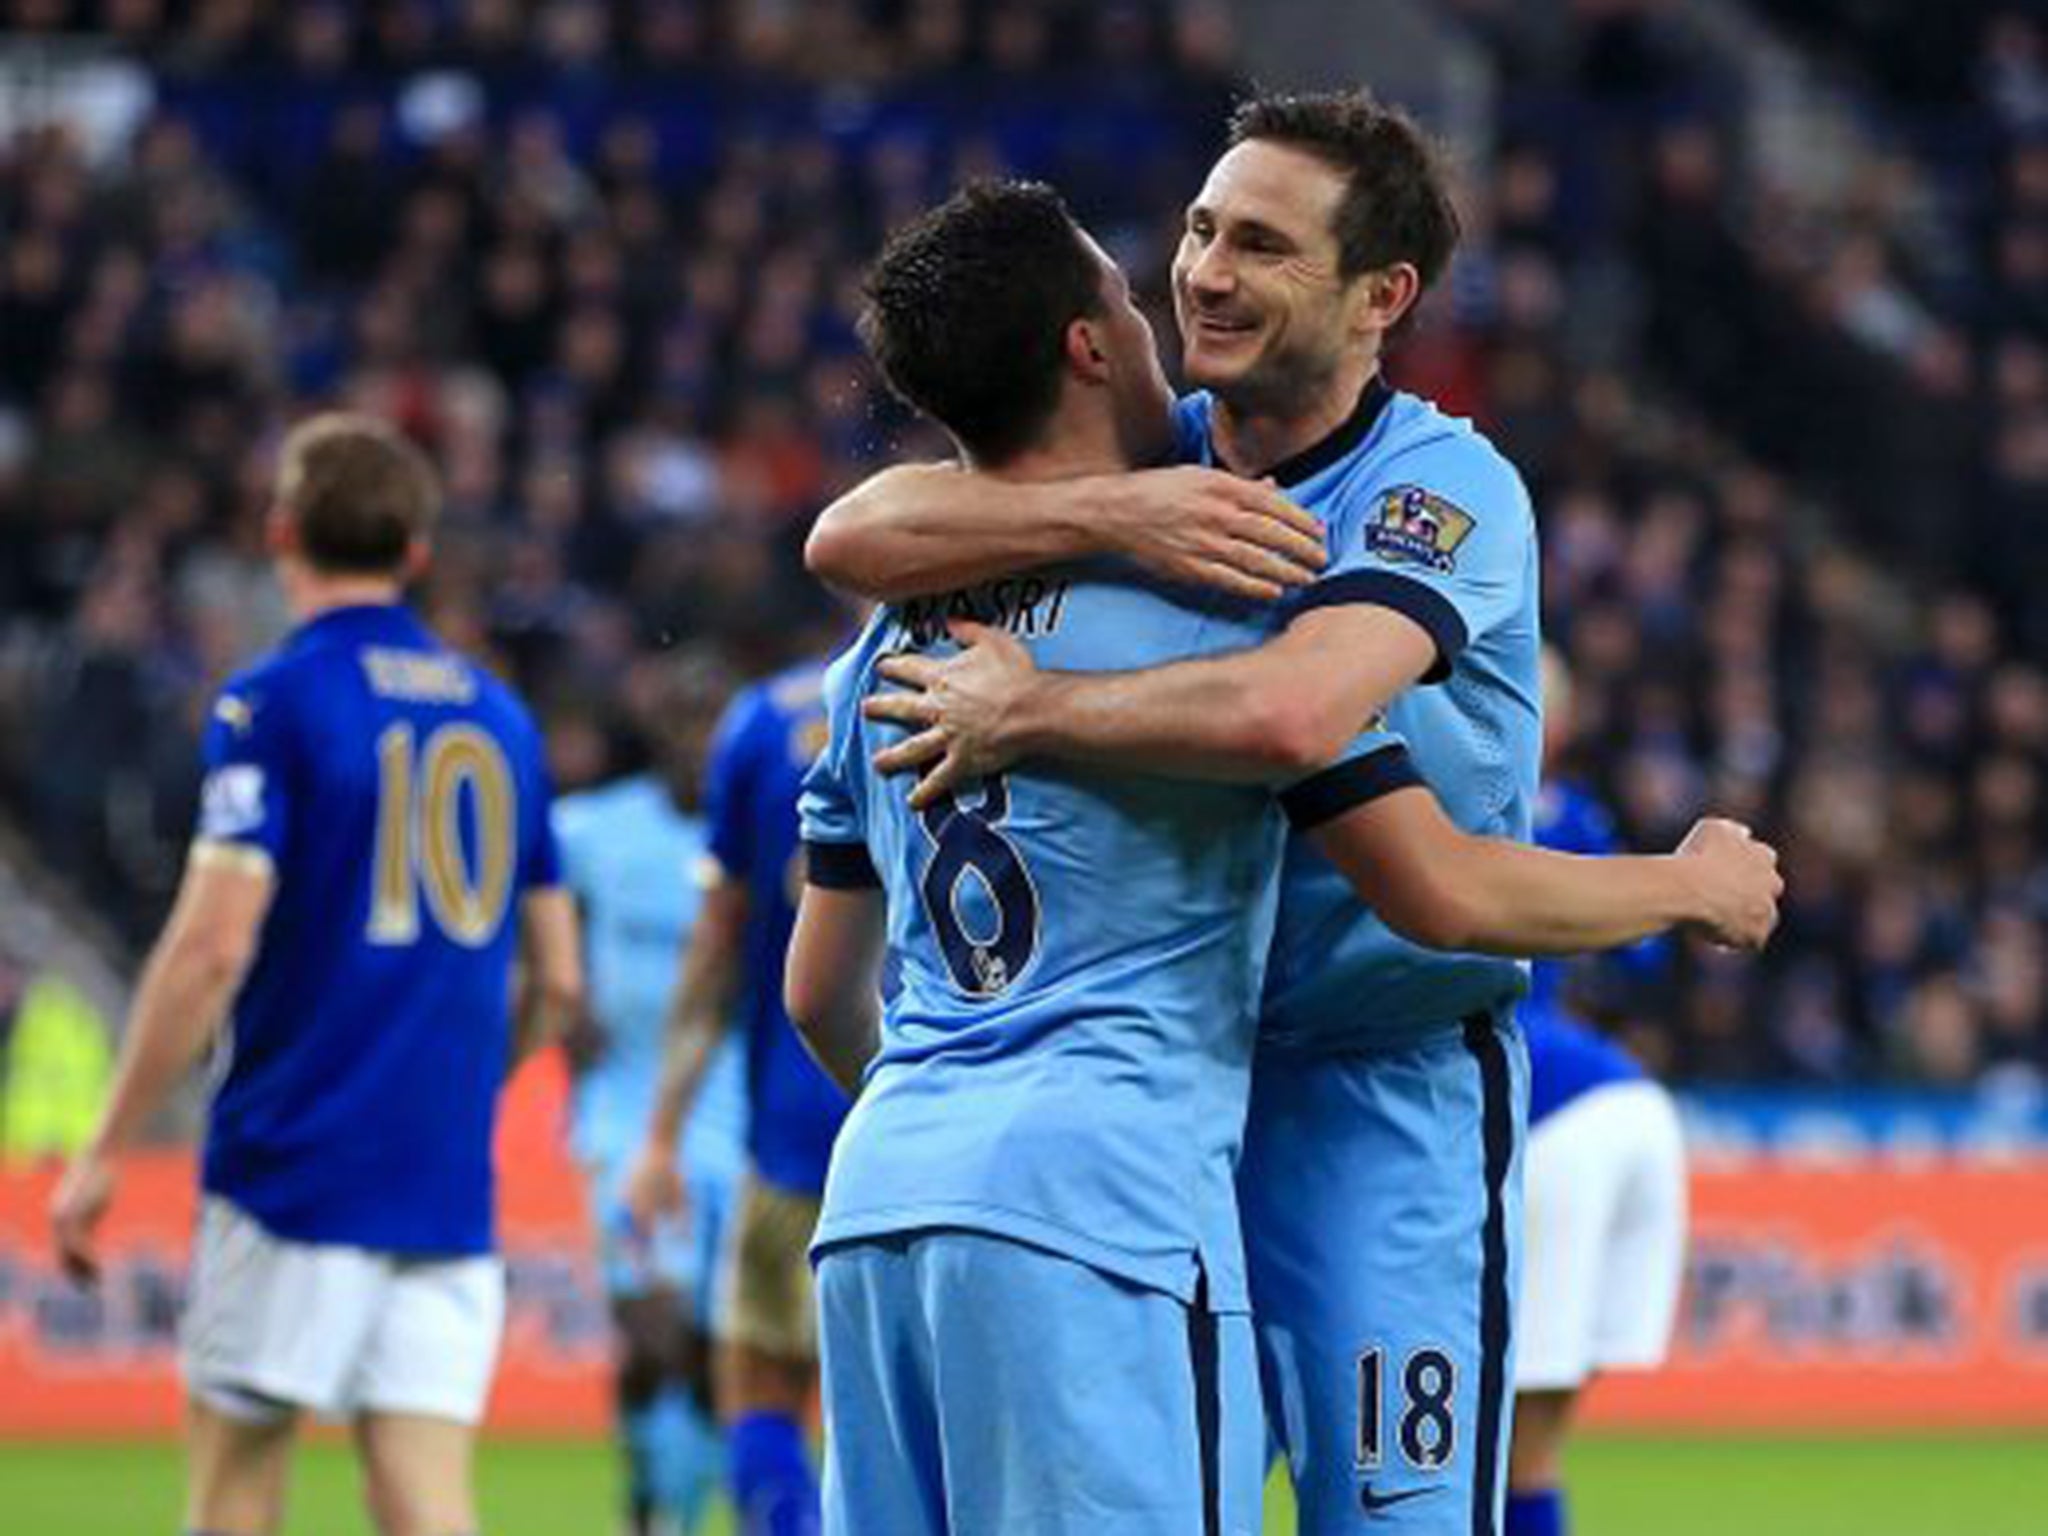 Frank Lampard is important to Manchester City, but where does that leave New York City FC? (PA)